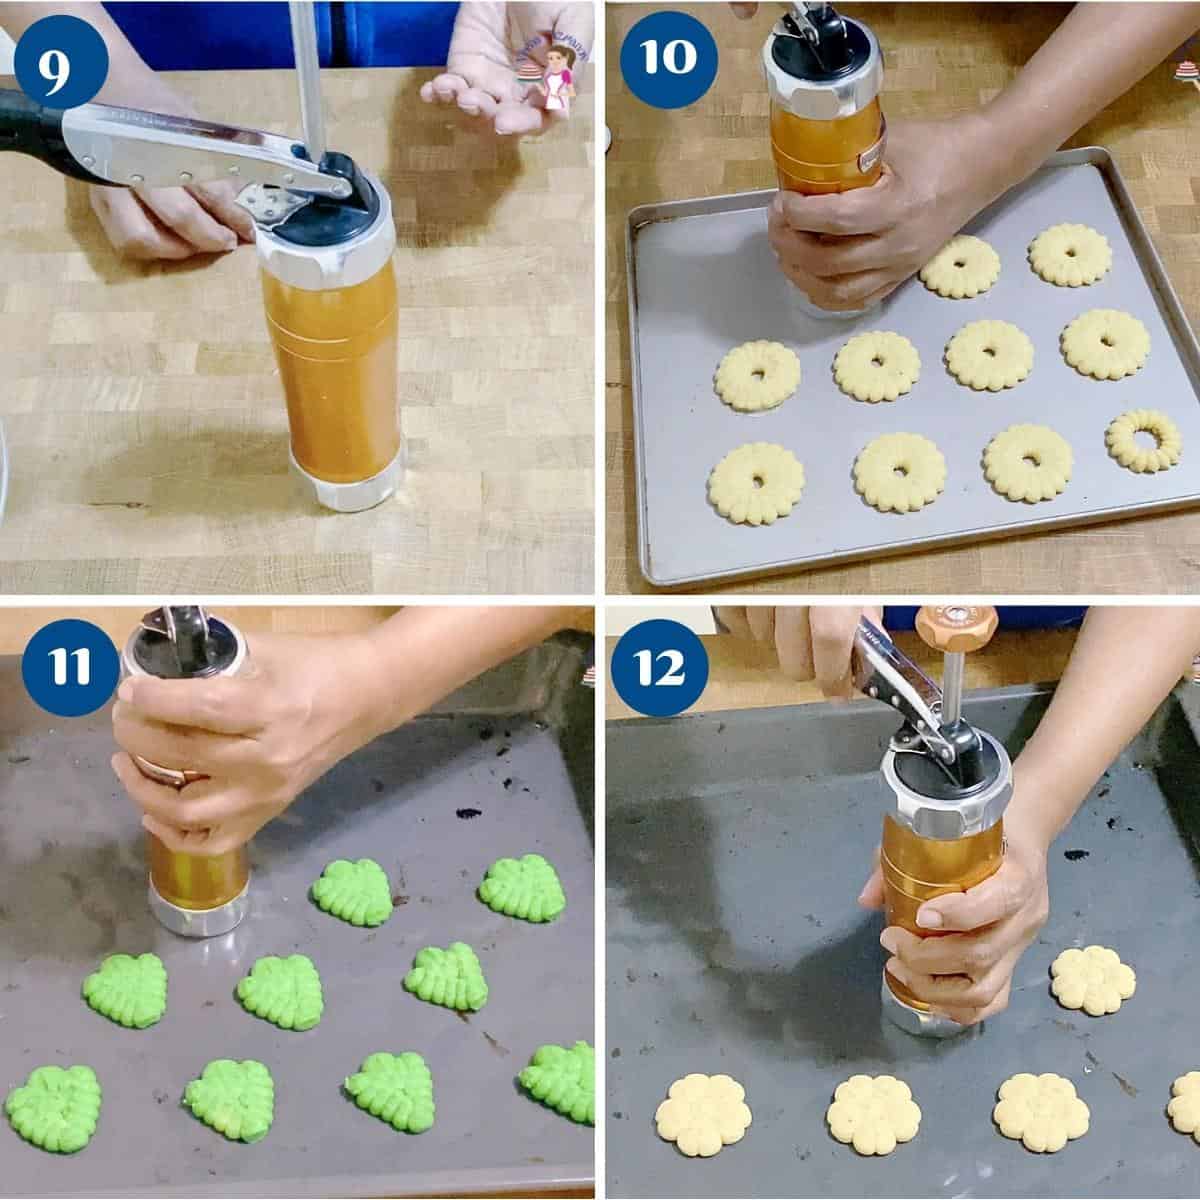 Progress pictures using the cookie press.